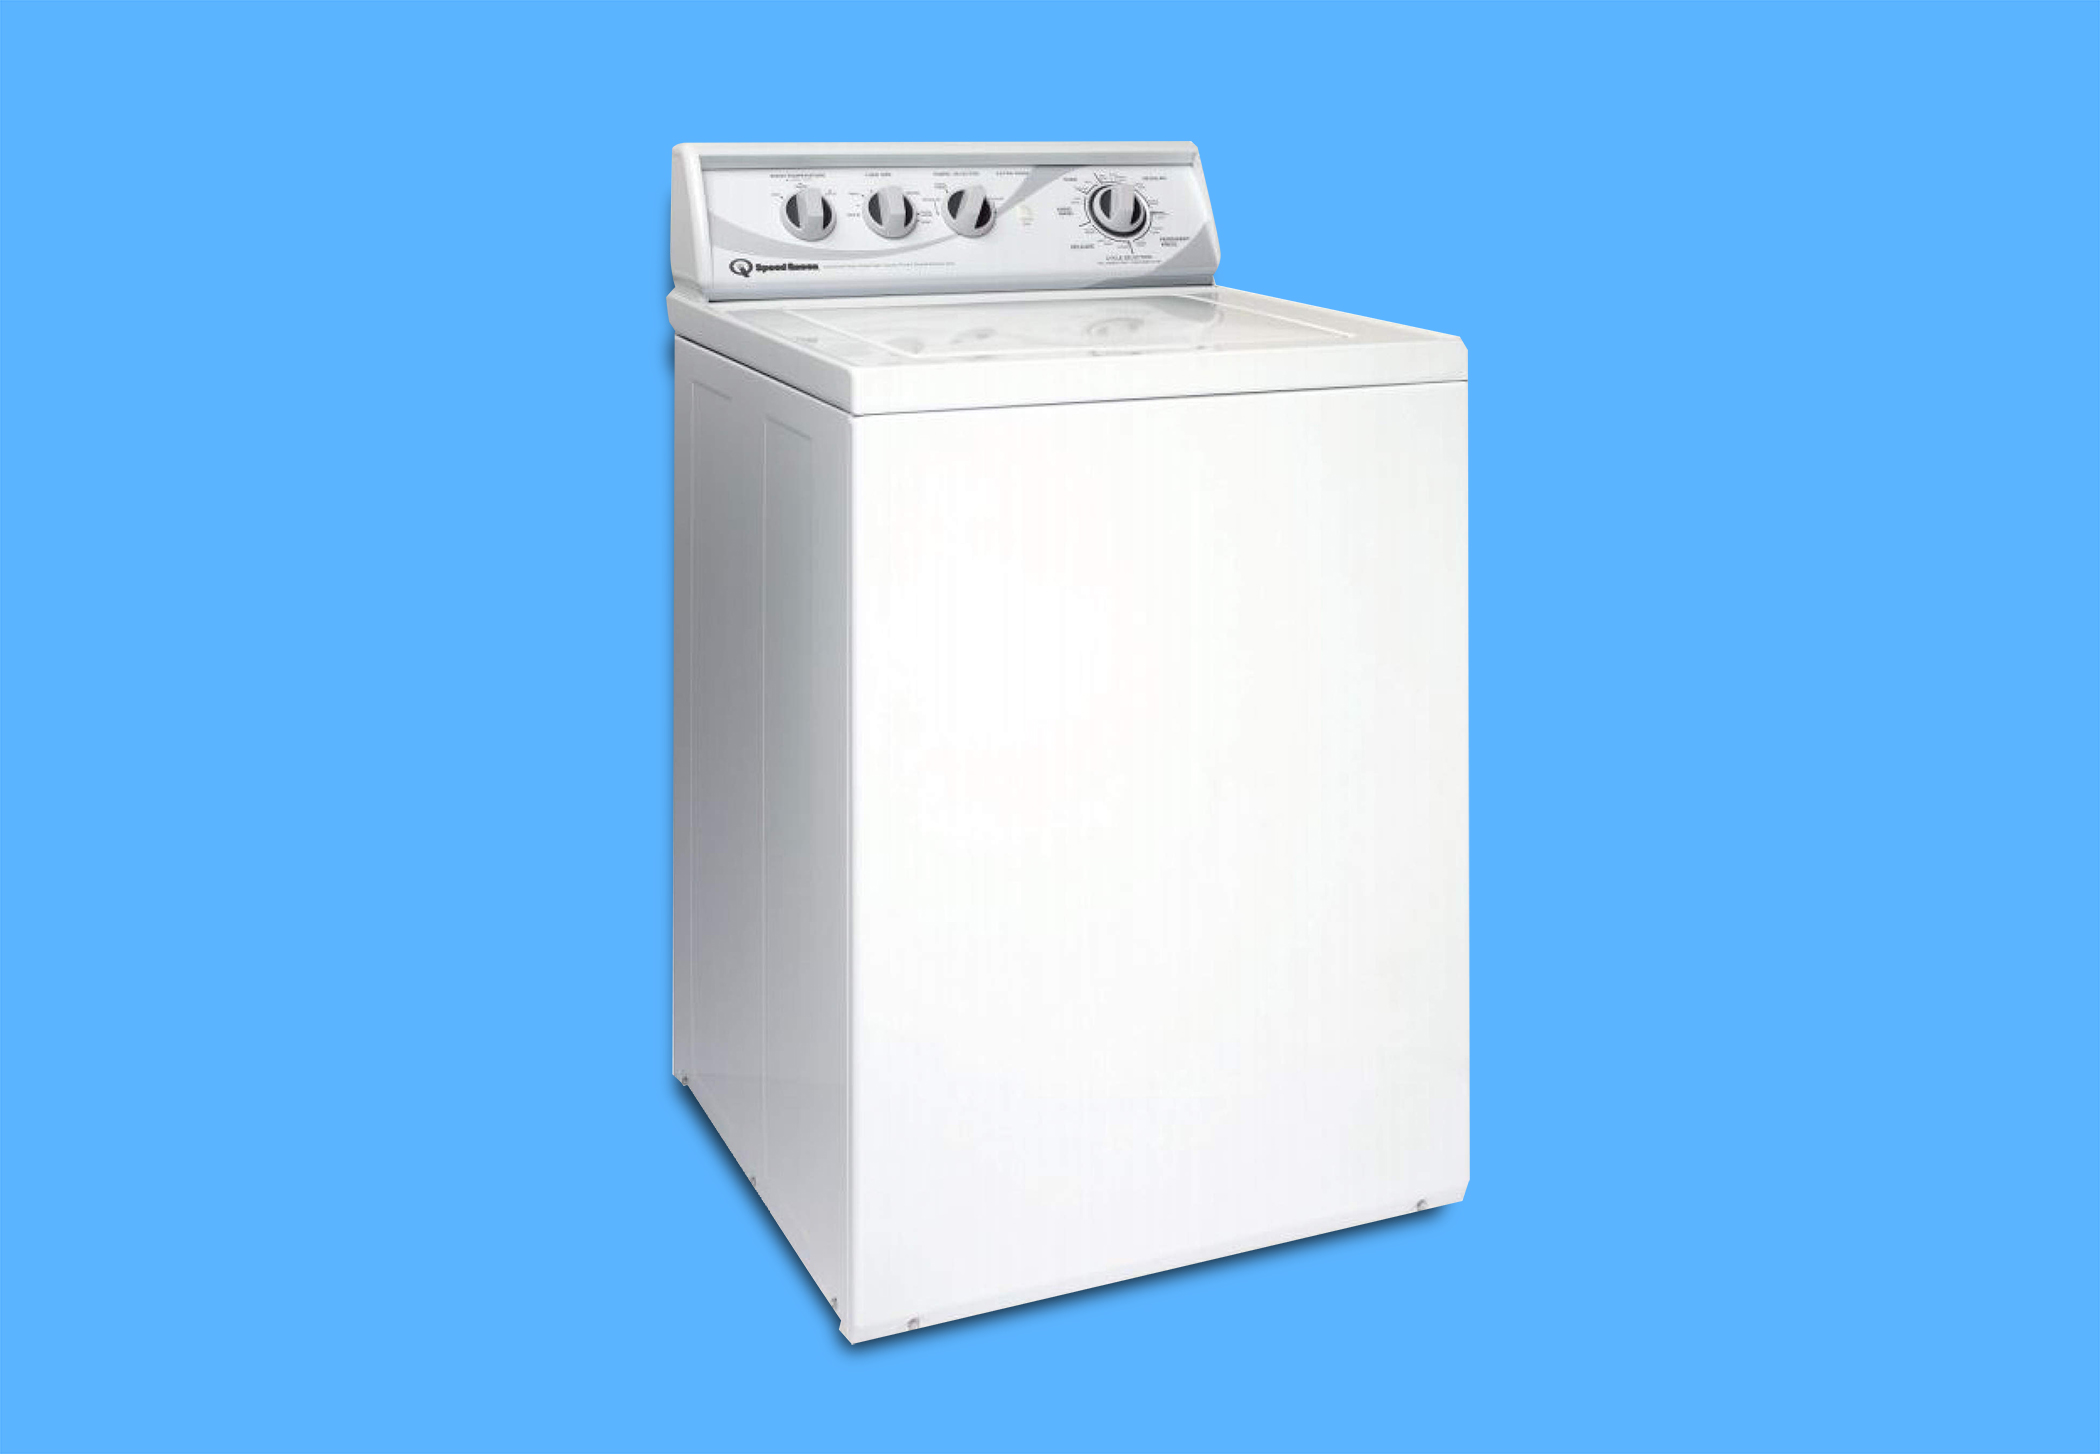 speed-queen-commercial-washer-ultra-high-efficiency-discount-supplier